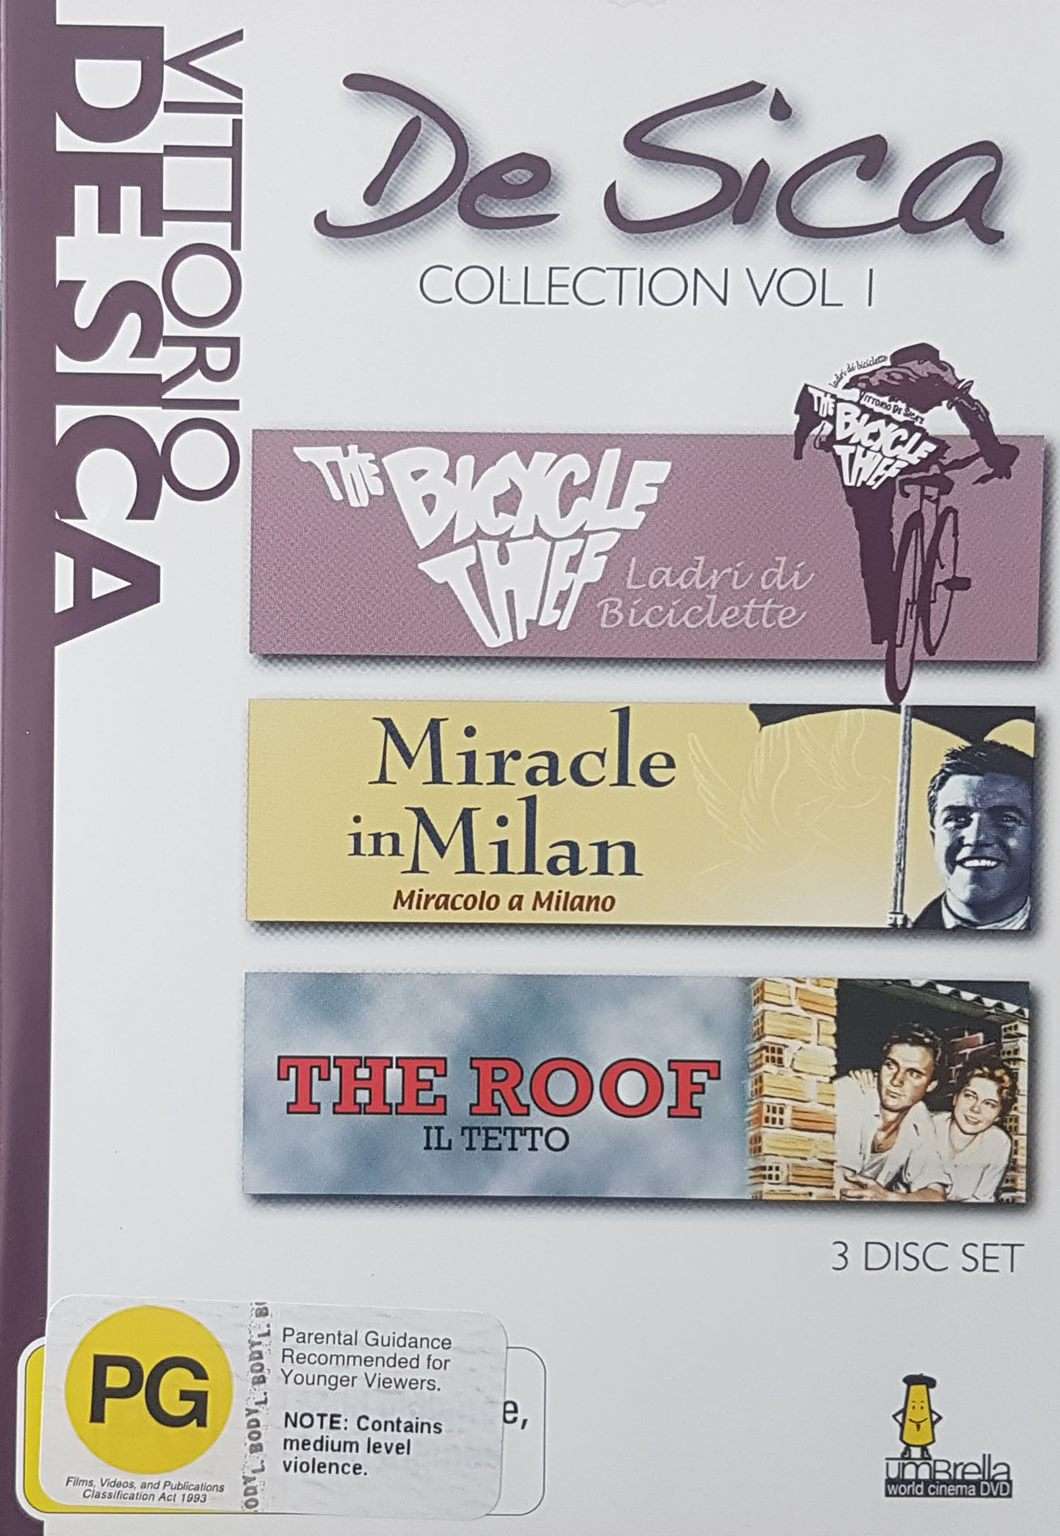 De Sica Collection Vol 1: The Bicycle Thief / Miracle in Milan / The Roof